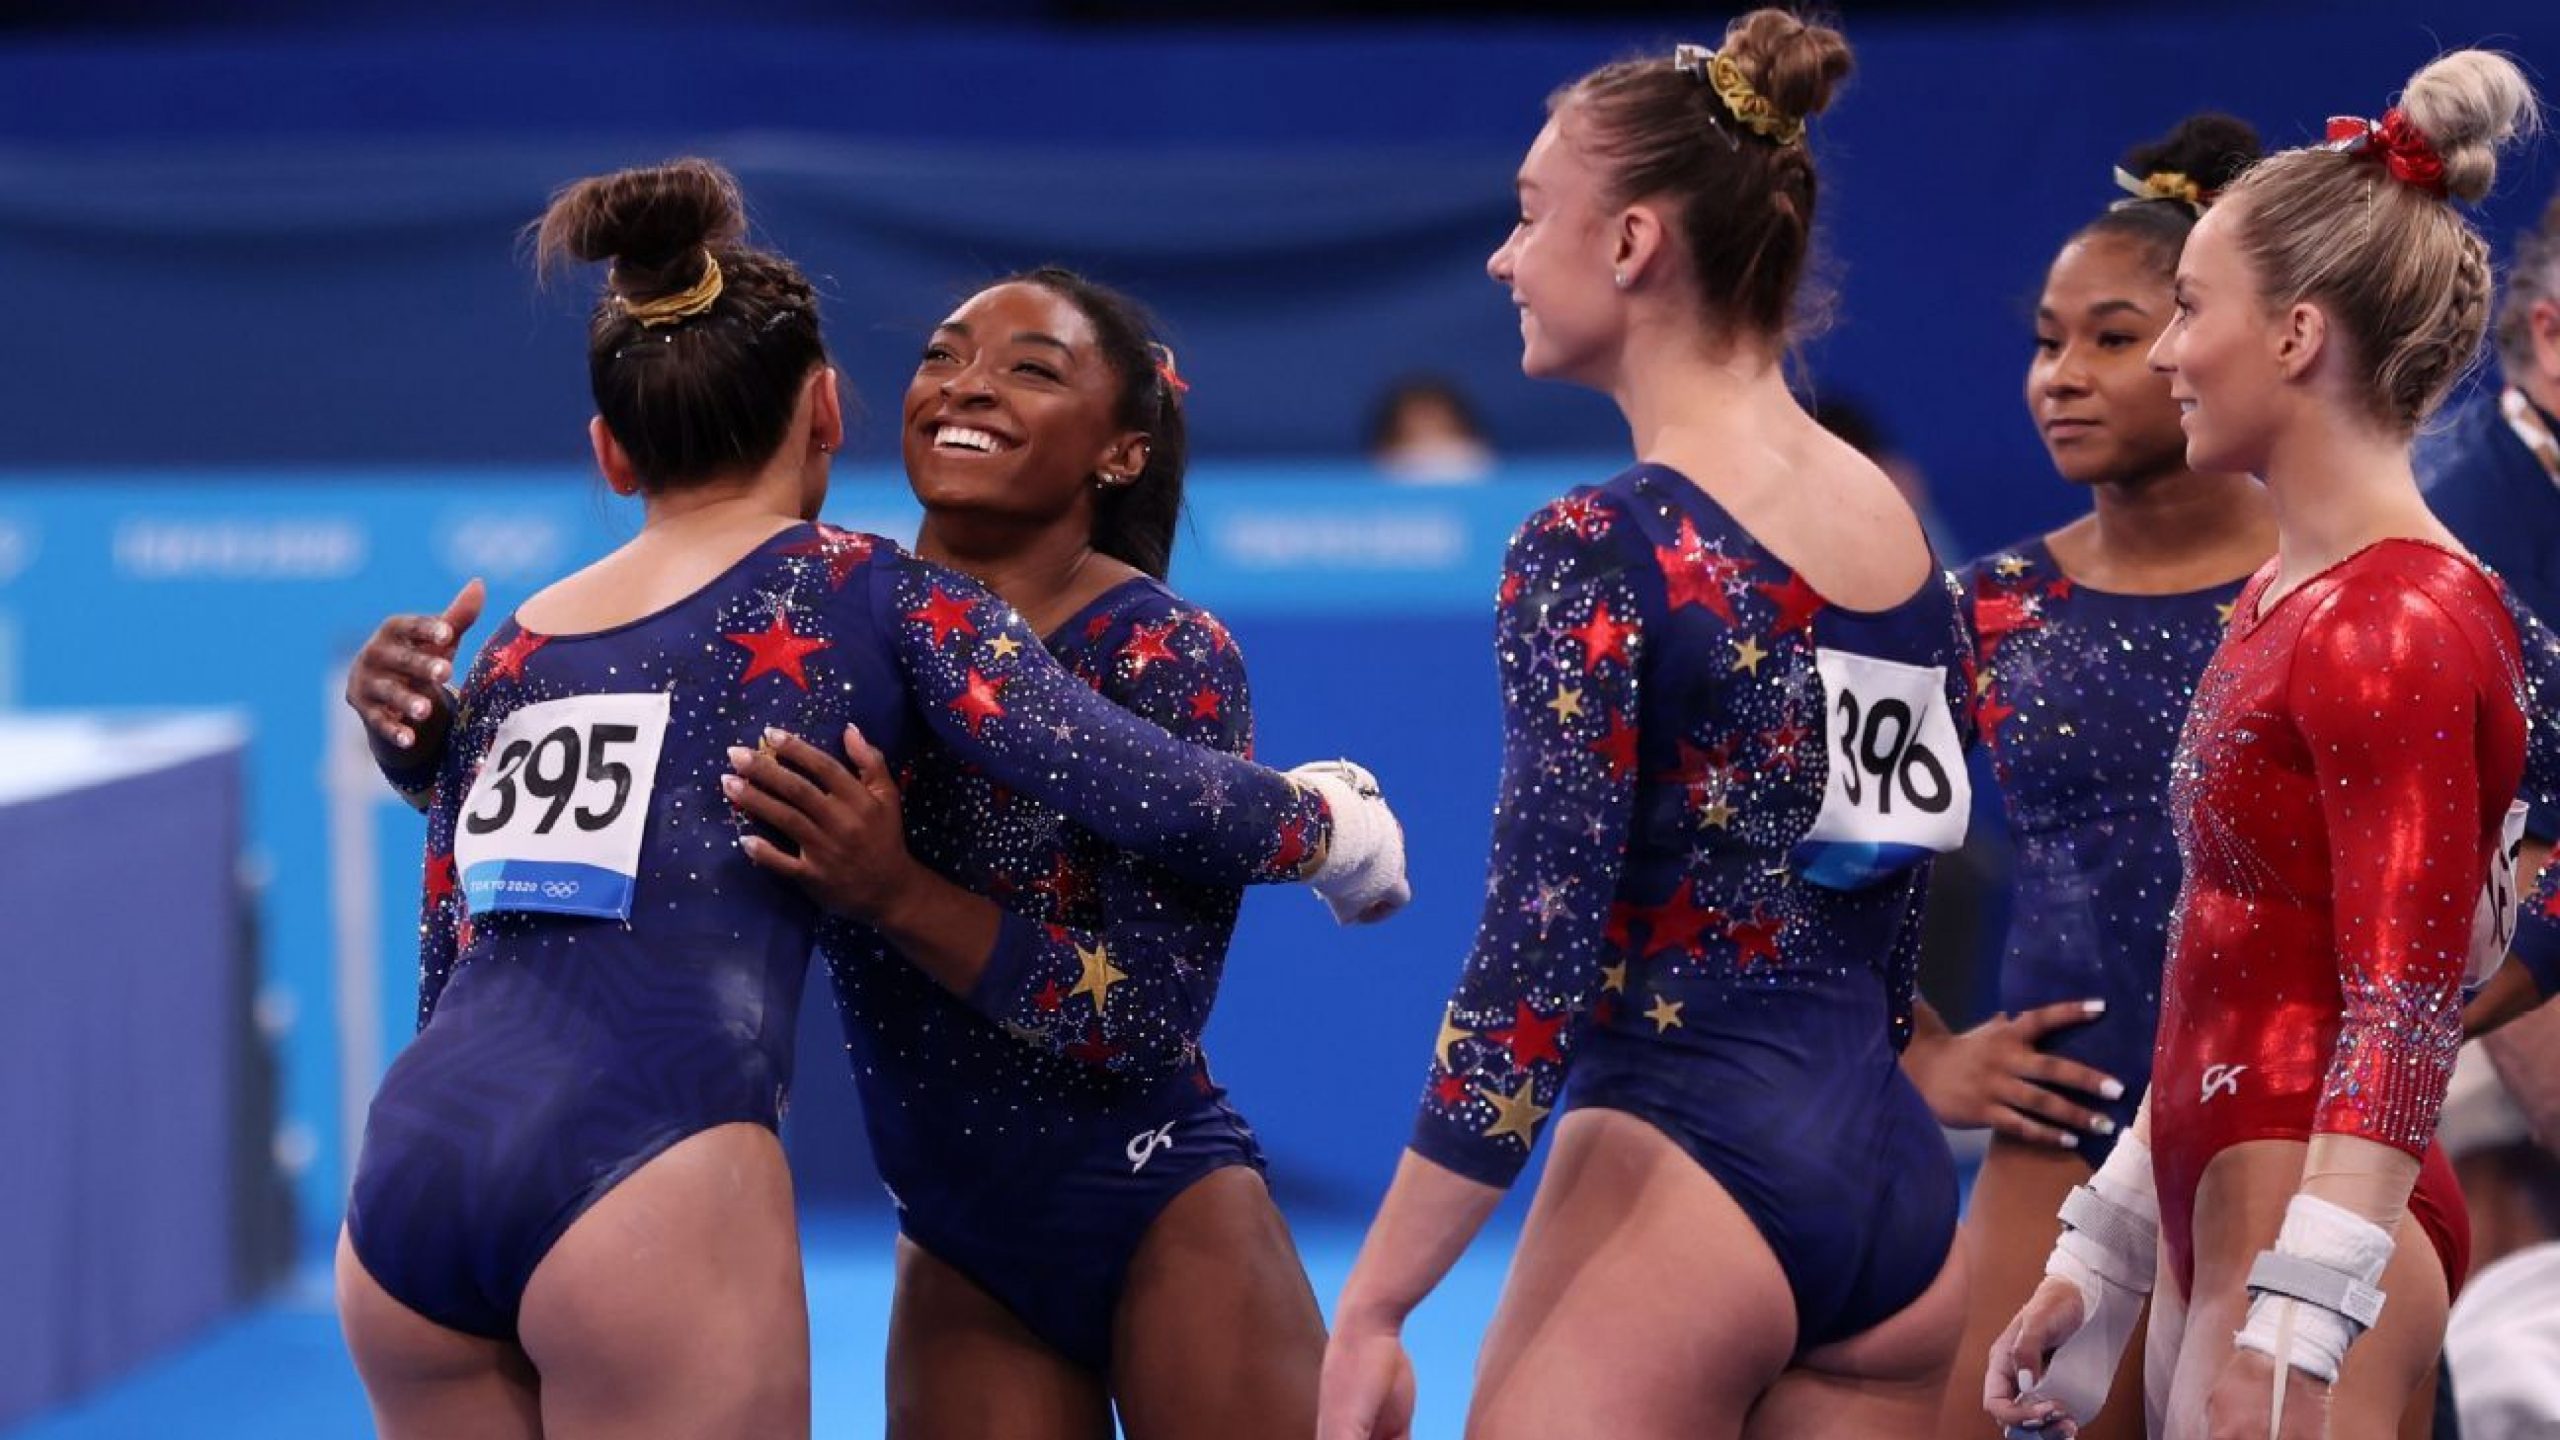 Here’s who joins Simone Biles in gymnastics finals